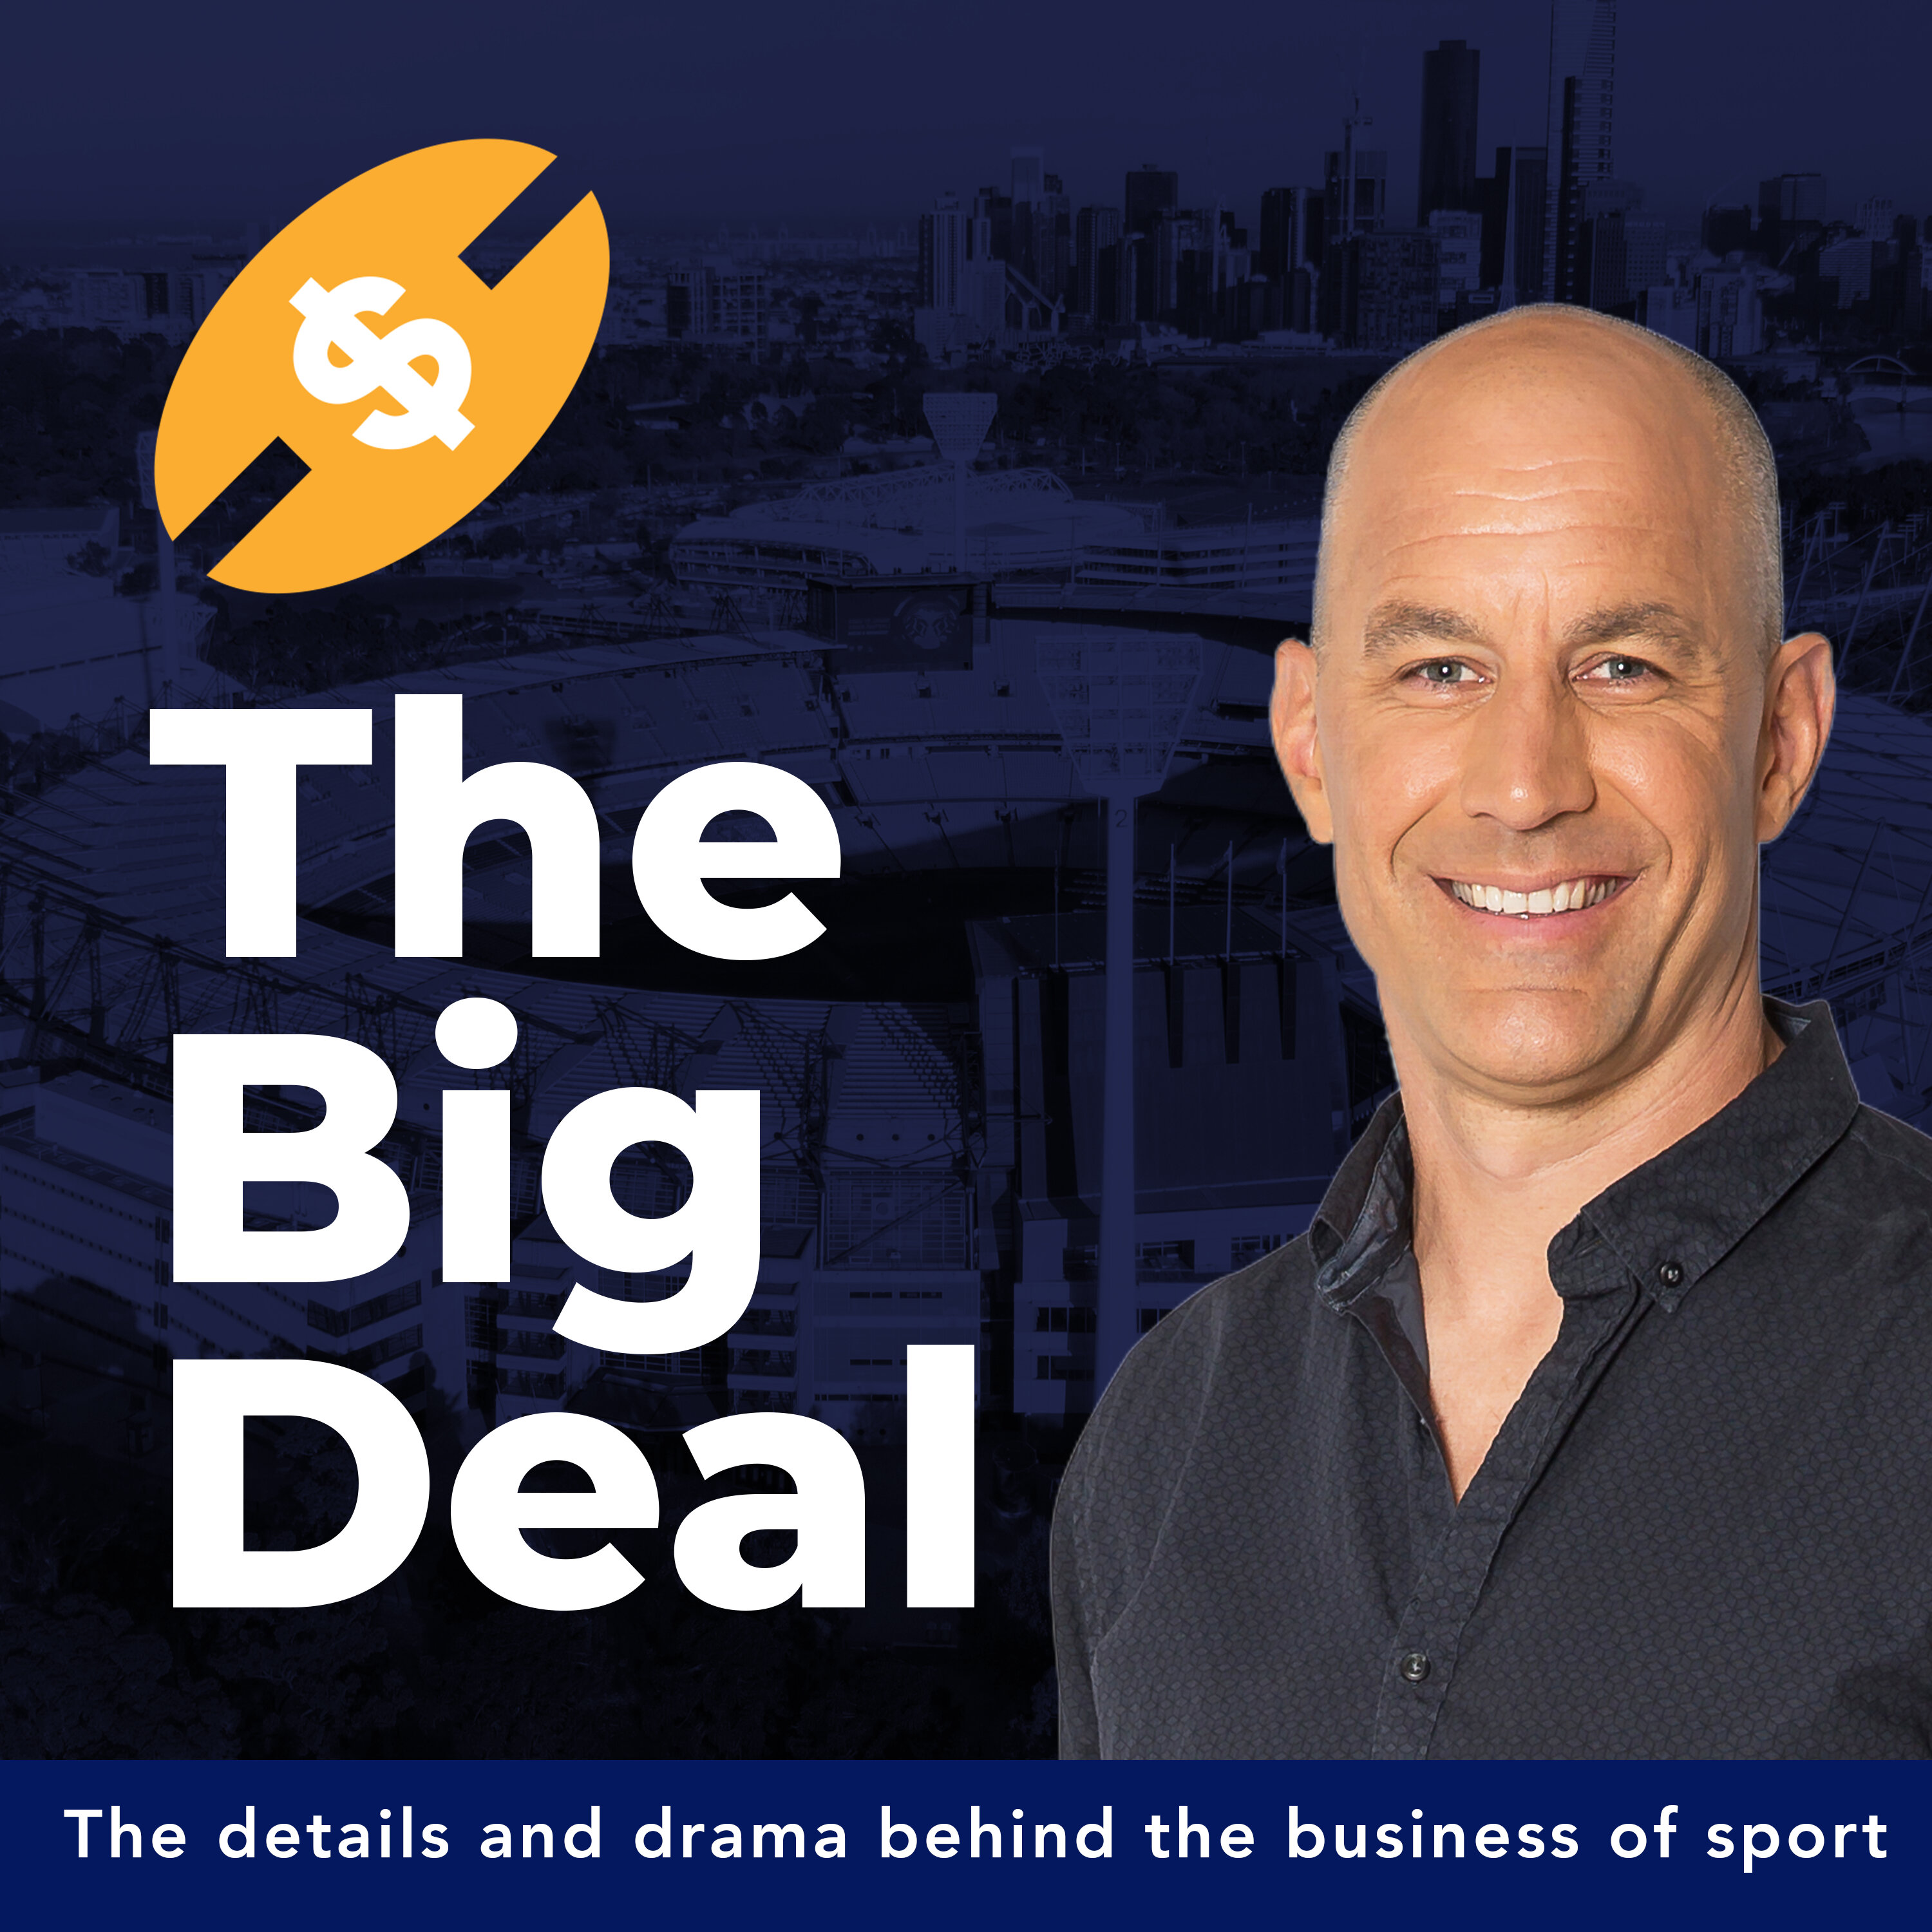 The future of sports, media & tech with industry pioneer John Kosner